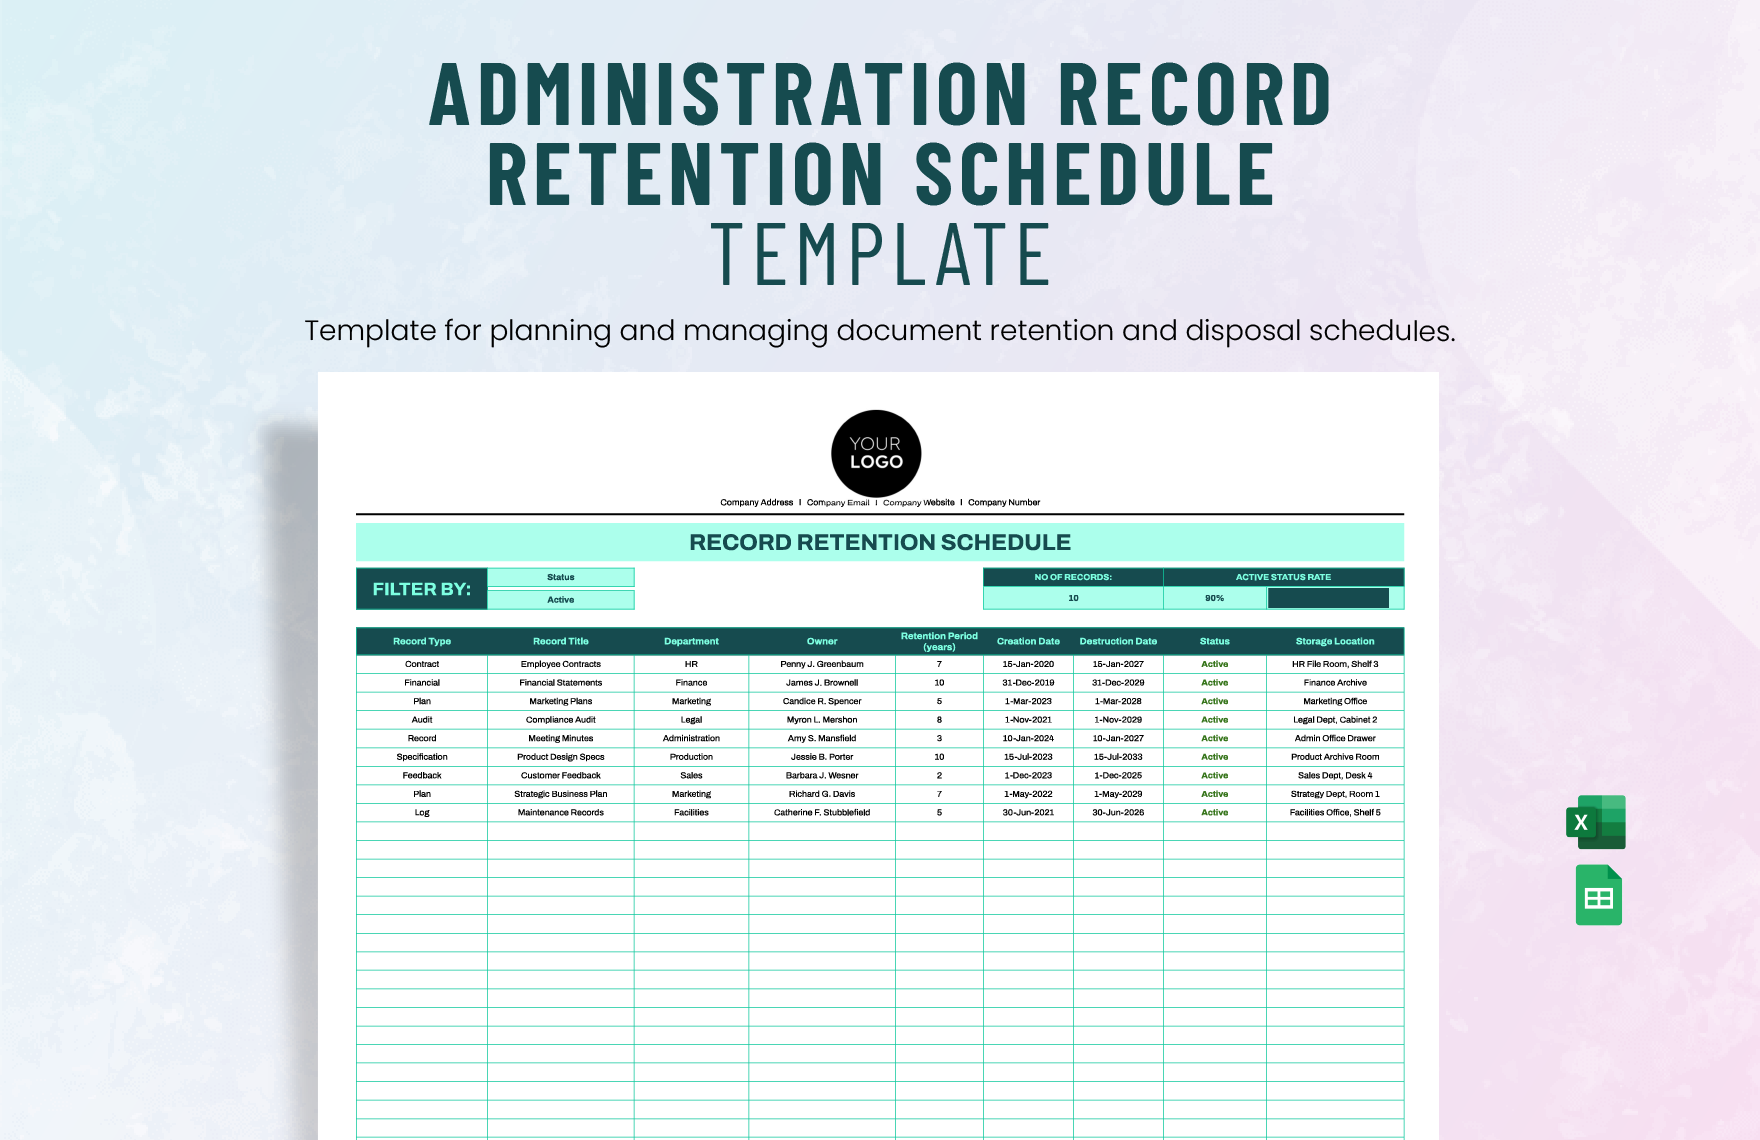 Administration Record Retention Schedule Template in Excel, Google Sheets